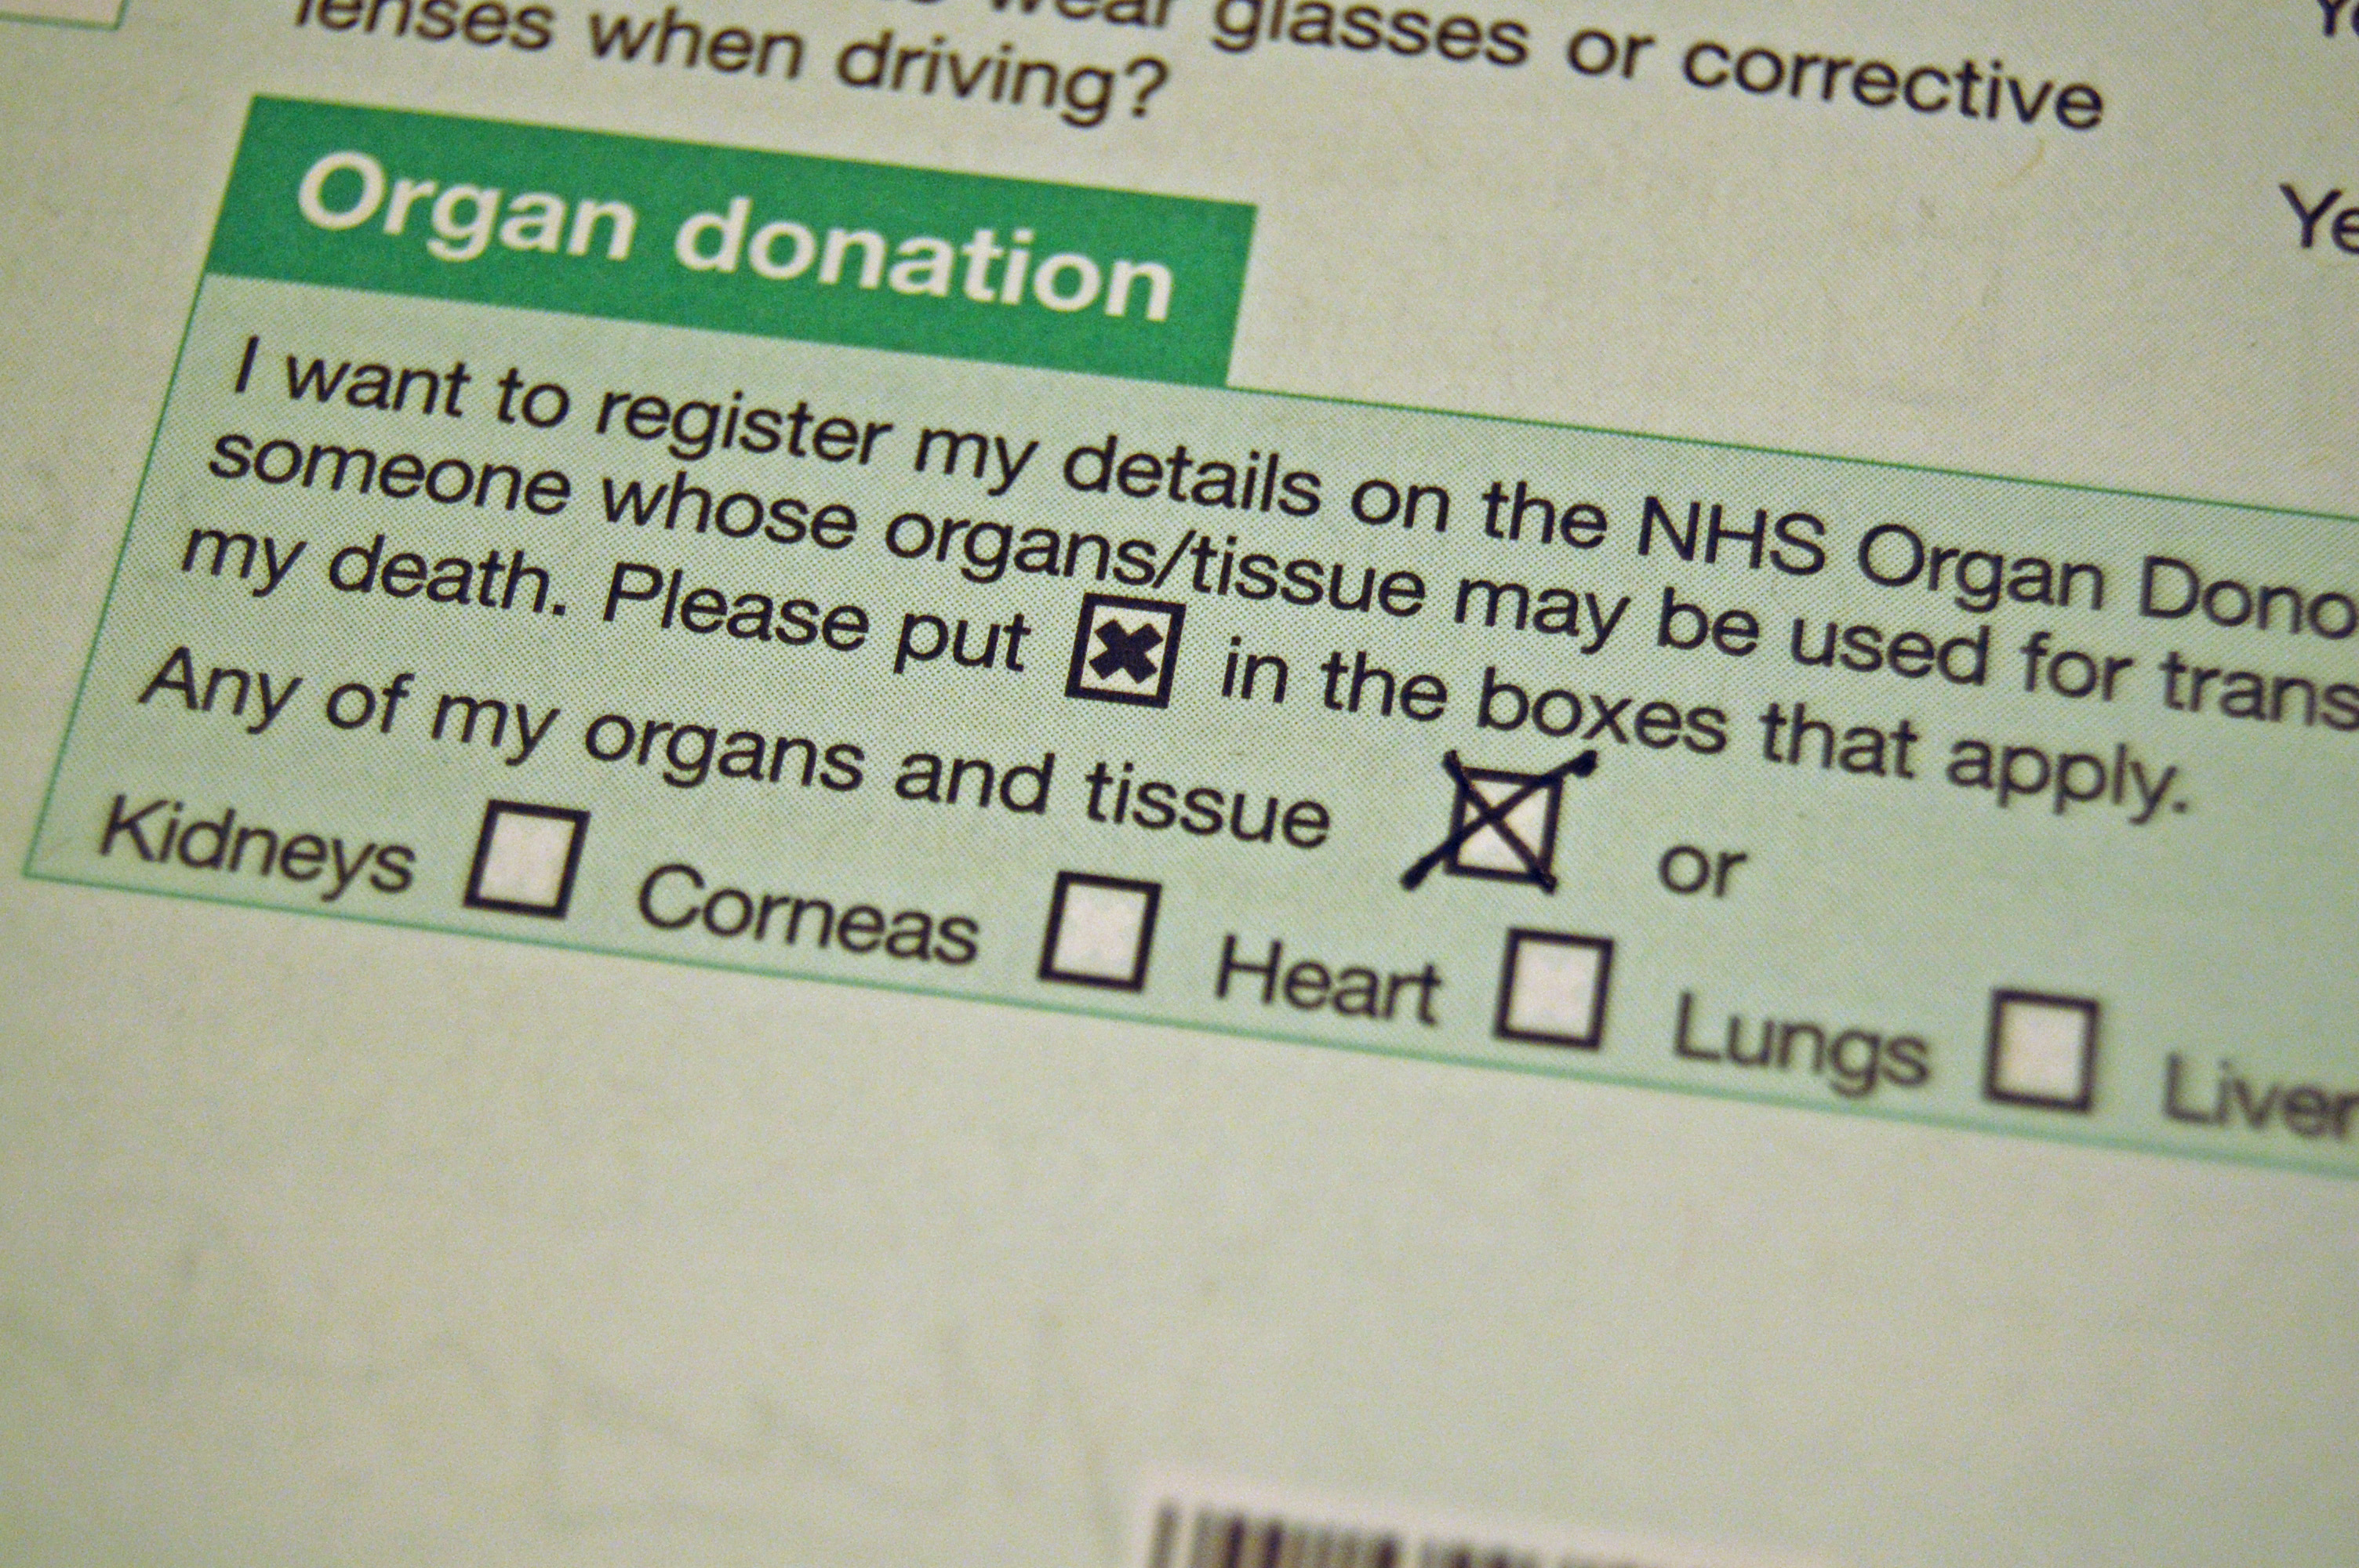 OPINION: Able students should elect to donate organs, save lives